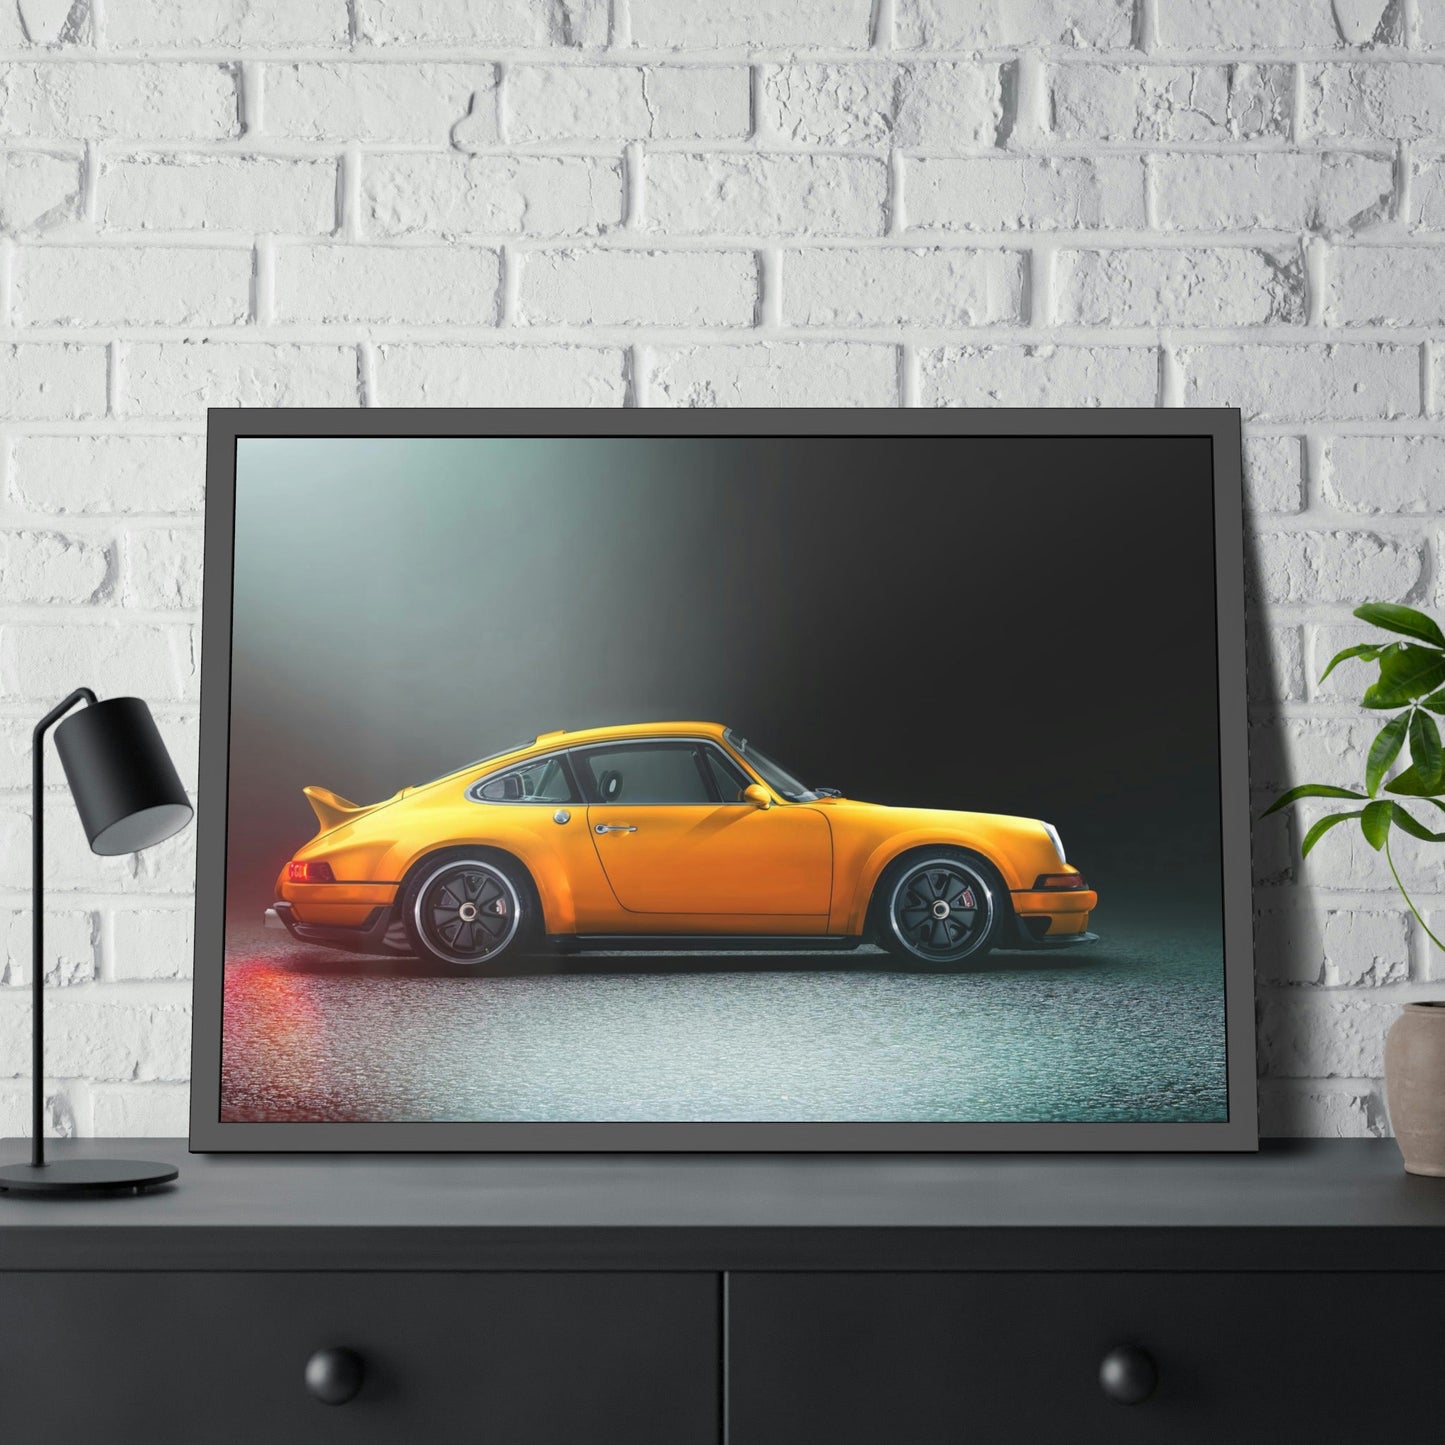 The Porsche Lifestyle: A Framed Poster of the Iconic Sports Car Brand